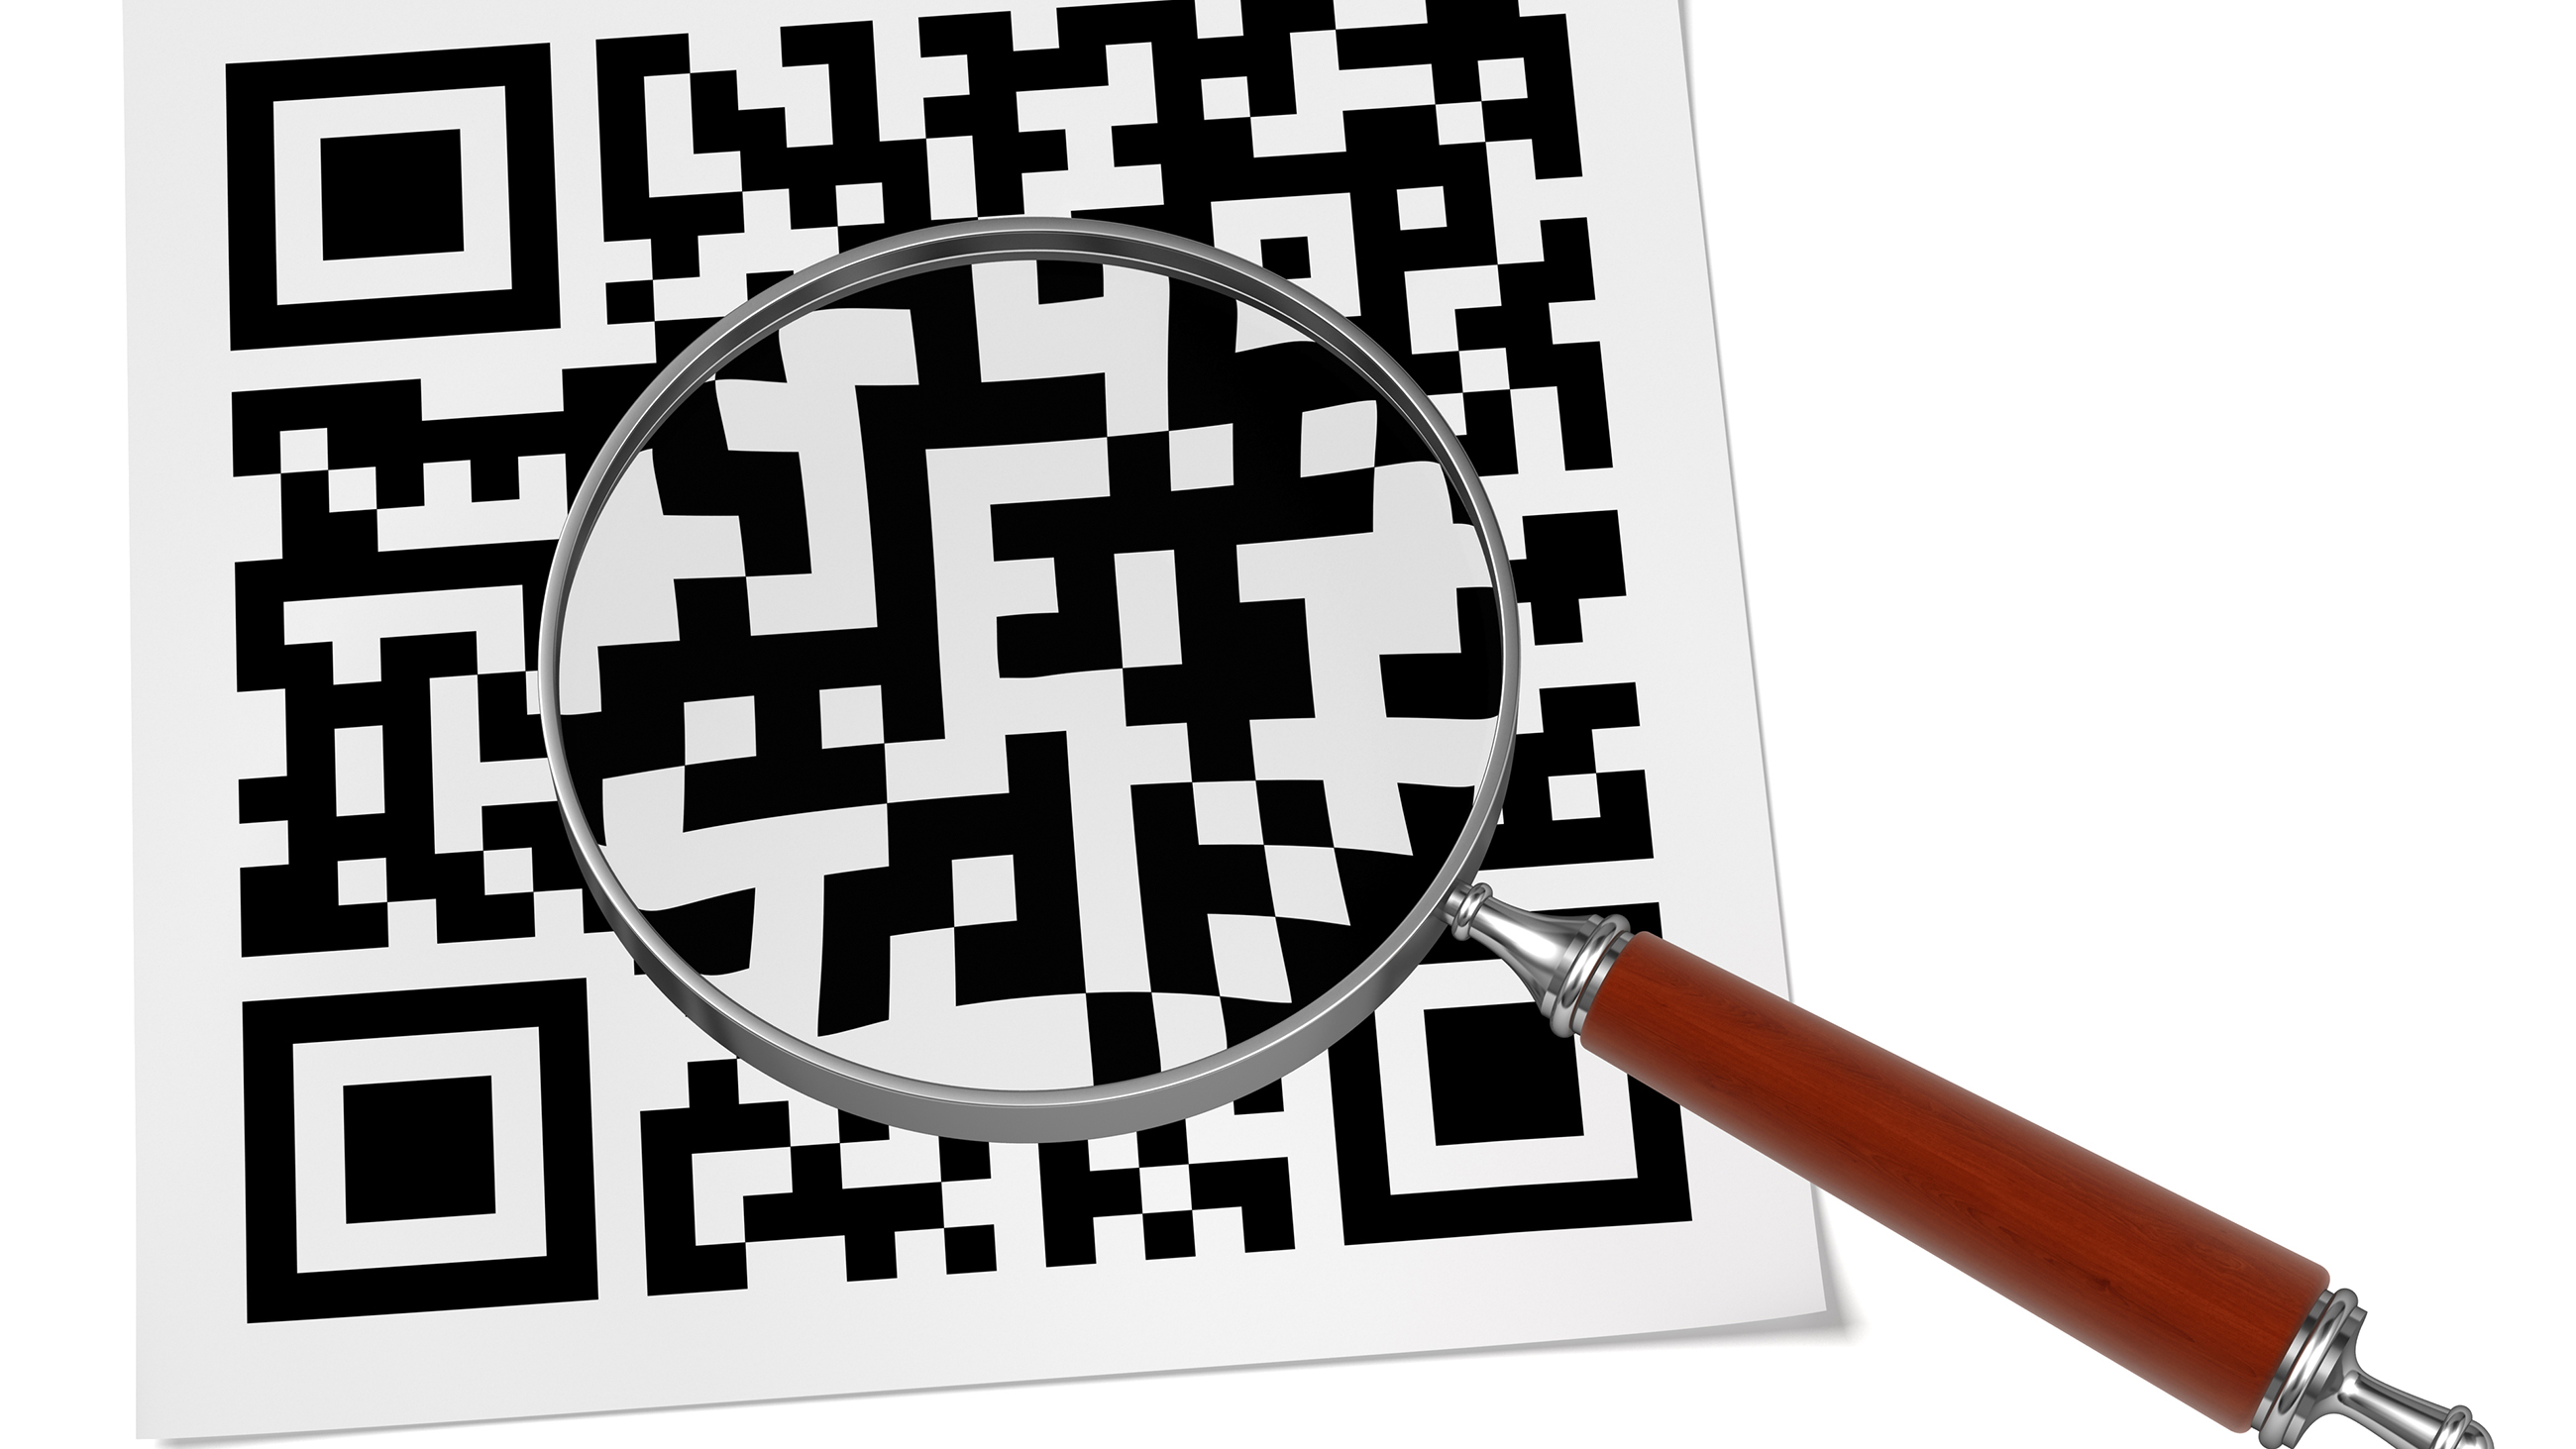 Critics fear American companies will use QR codes to conceal GMO data, citing studies showing that most consumers don't use them.